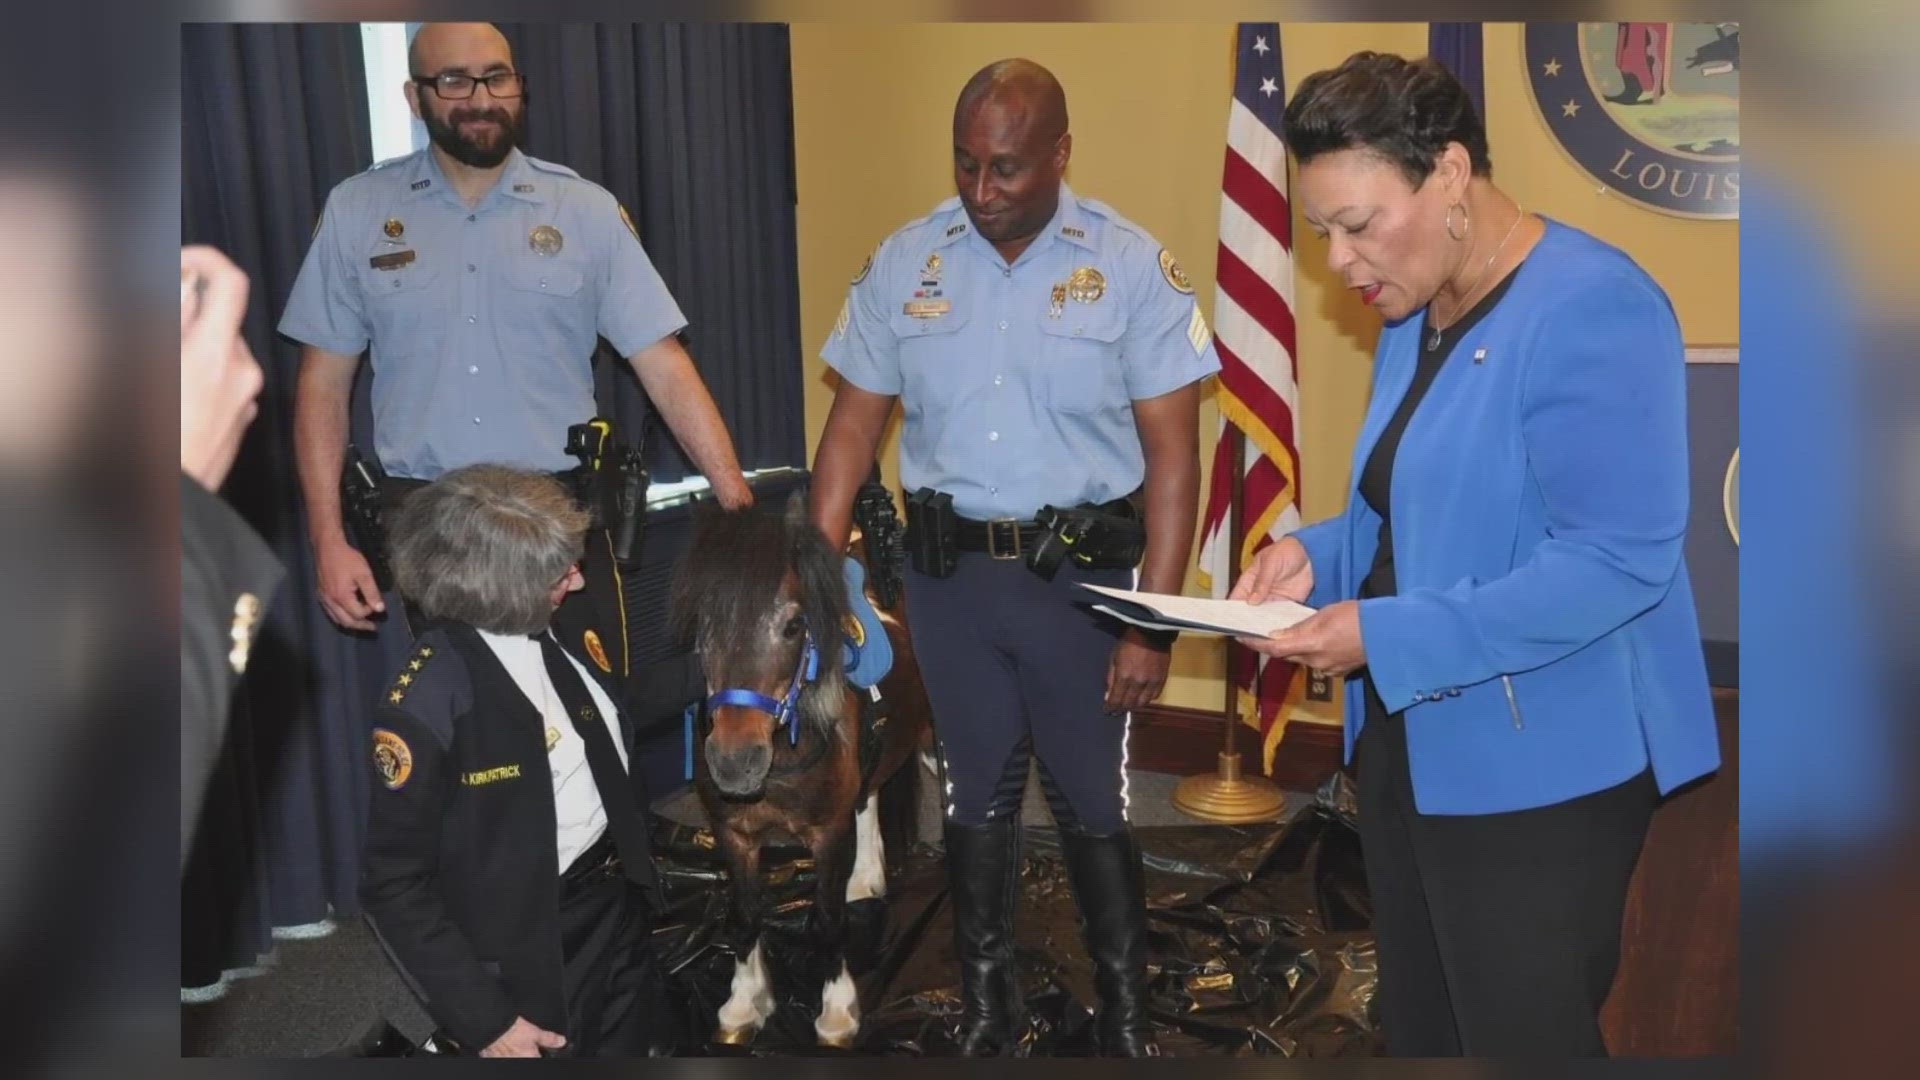 The 15-year-old horse received his own badge and proclamation from the New Orleans City Council.